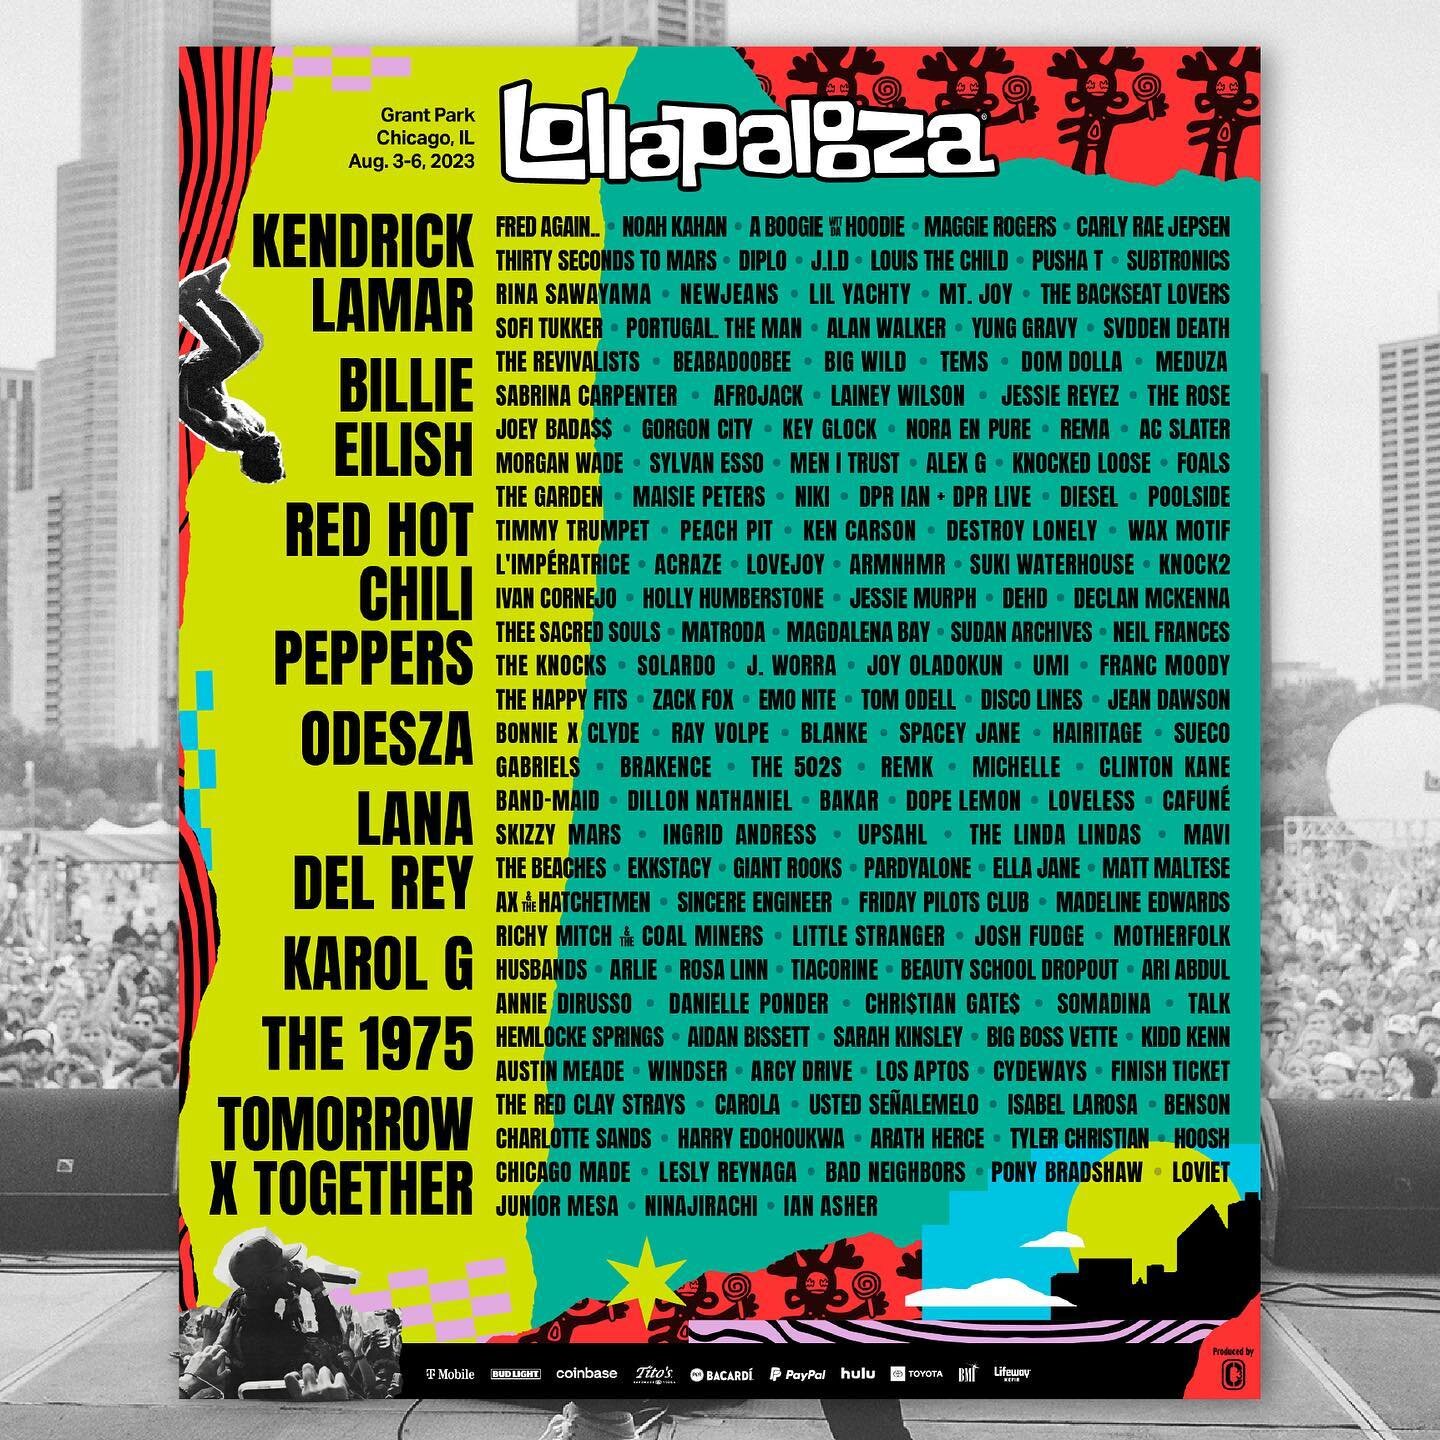 Husbands, Ax and the Hatchetmen and Motherfolk will return to Chicago this summer for Lollapalooza!